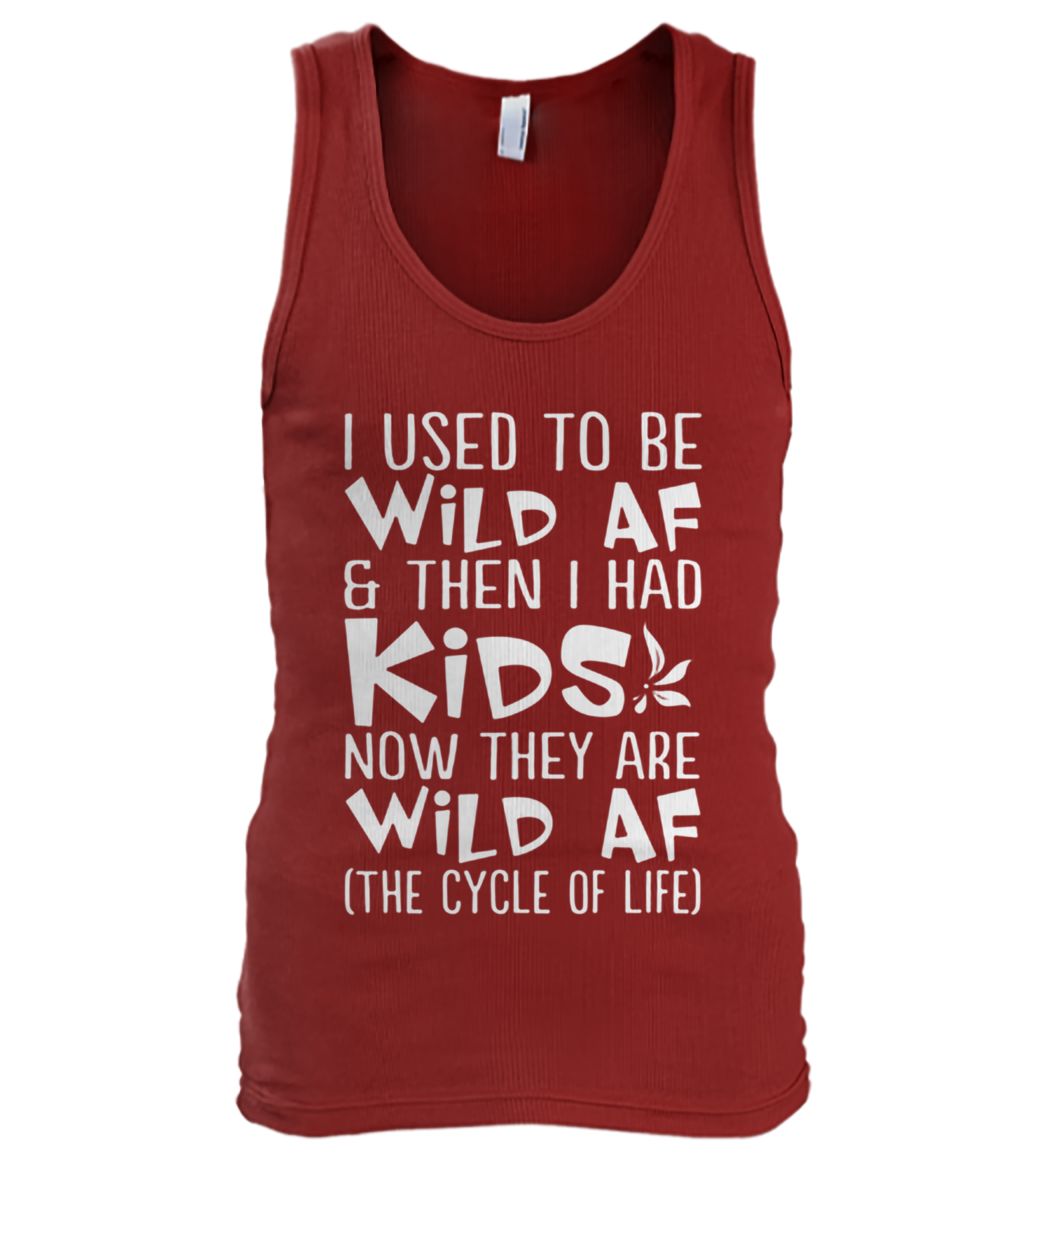 I used to be wild af and then I had kids now they are wild af the cycle of life men's tank top